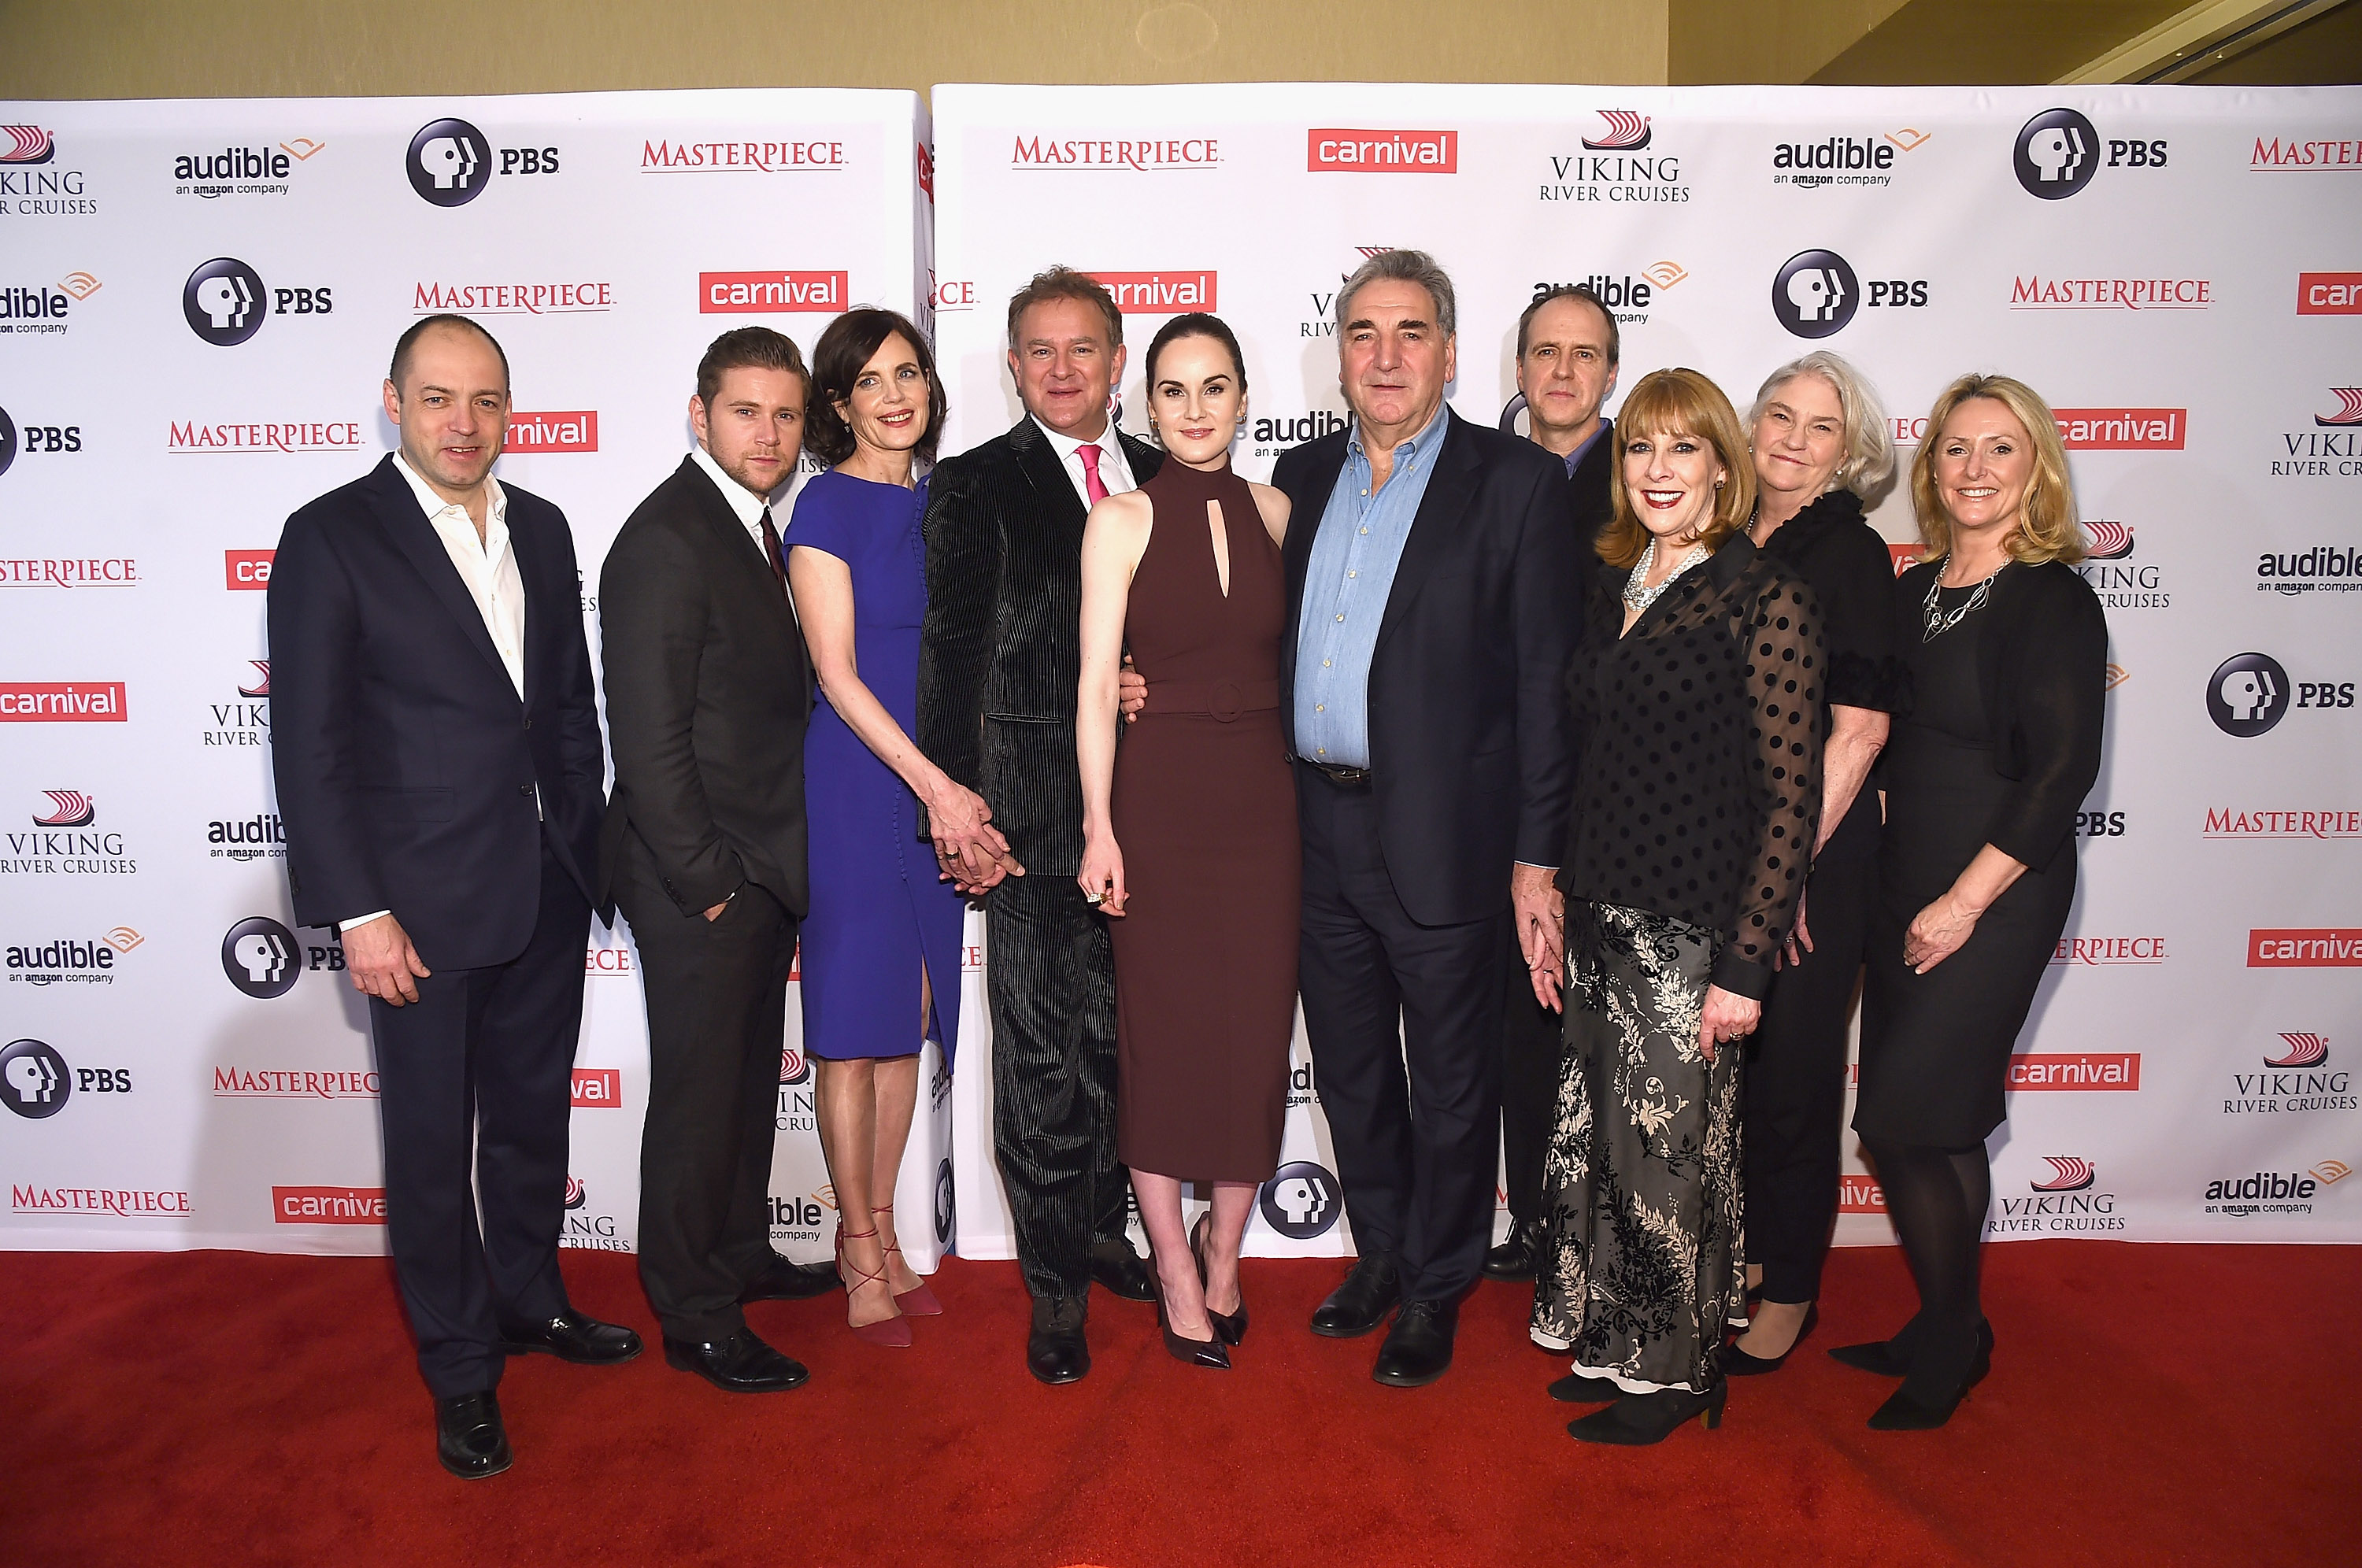 Downton Abbey cast and crew attend the "Downton Abbey" Series Season Six premiere at Millenium Hotel on December 7, 2015 in New York City. (Wire Images / Getty Images)